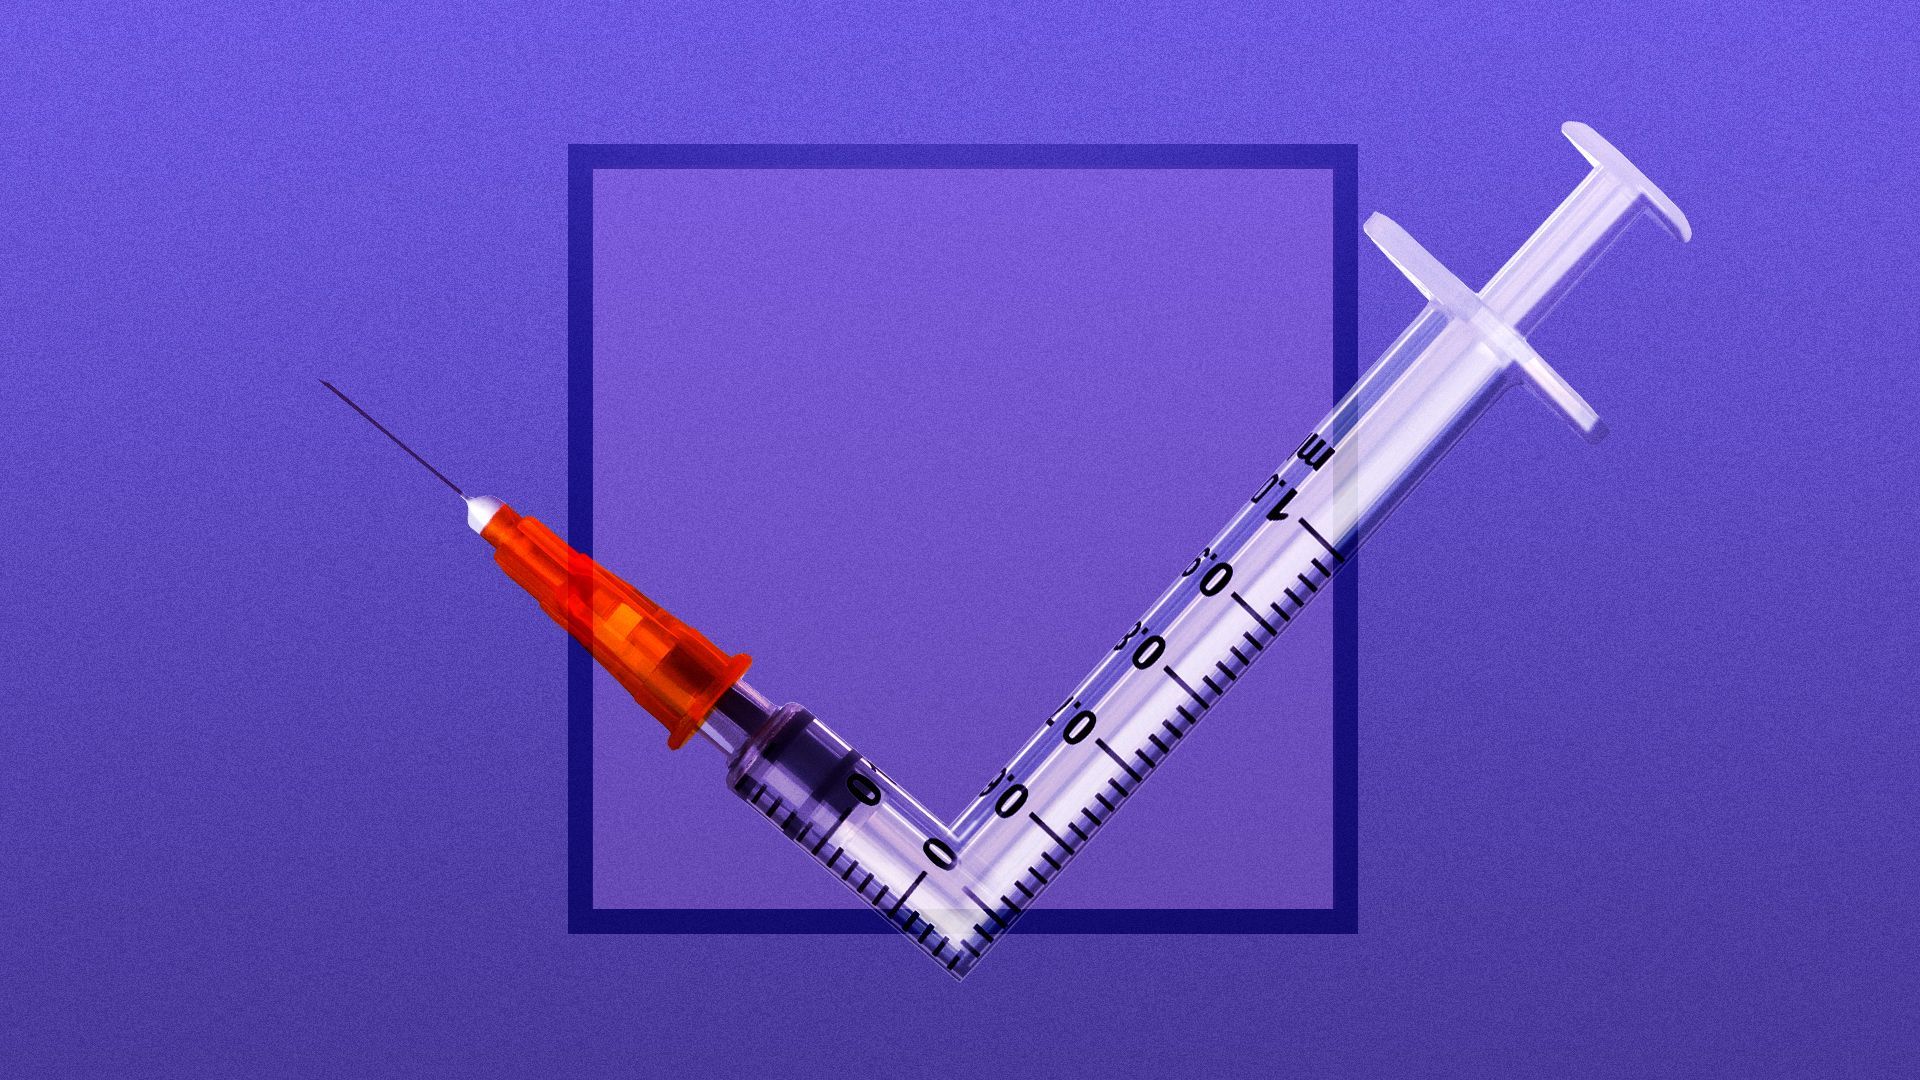 Illustration of a syringe shaped like a checkmark against a box